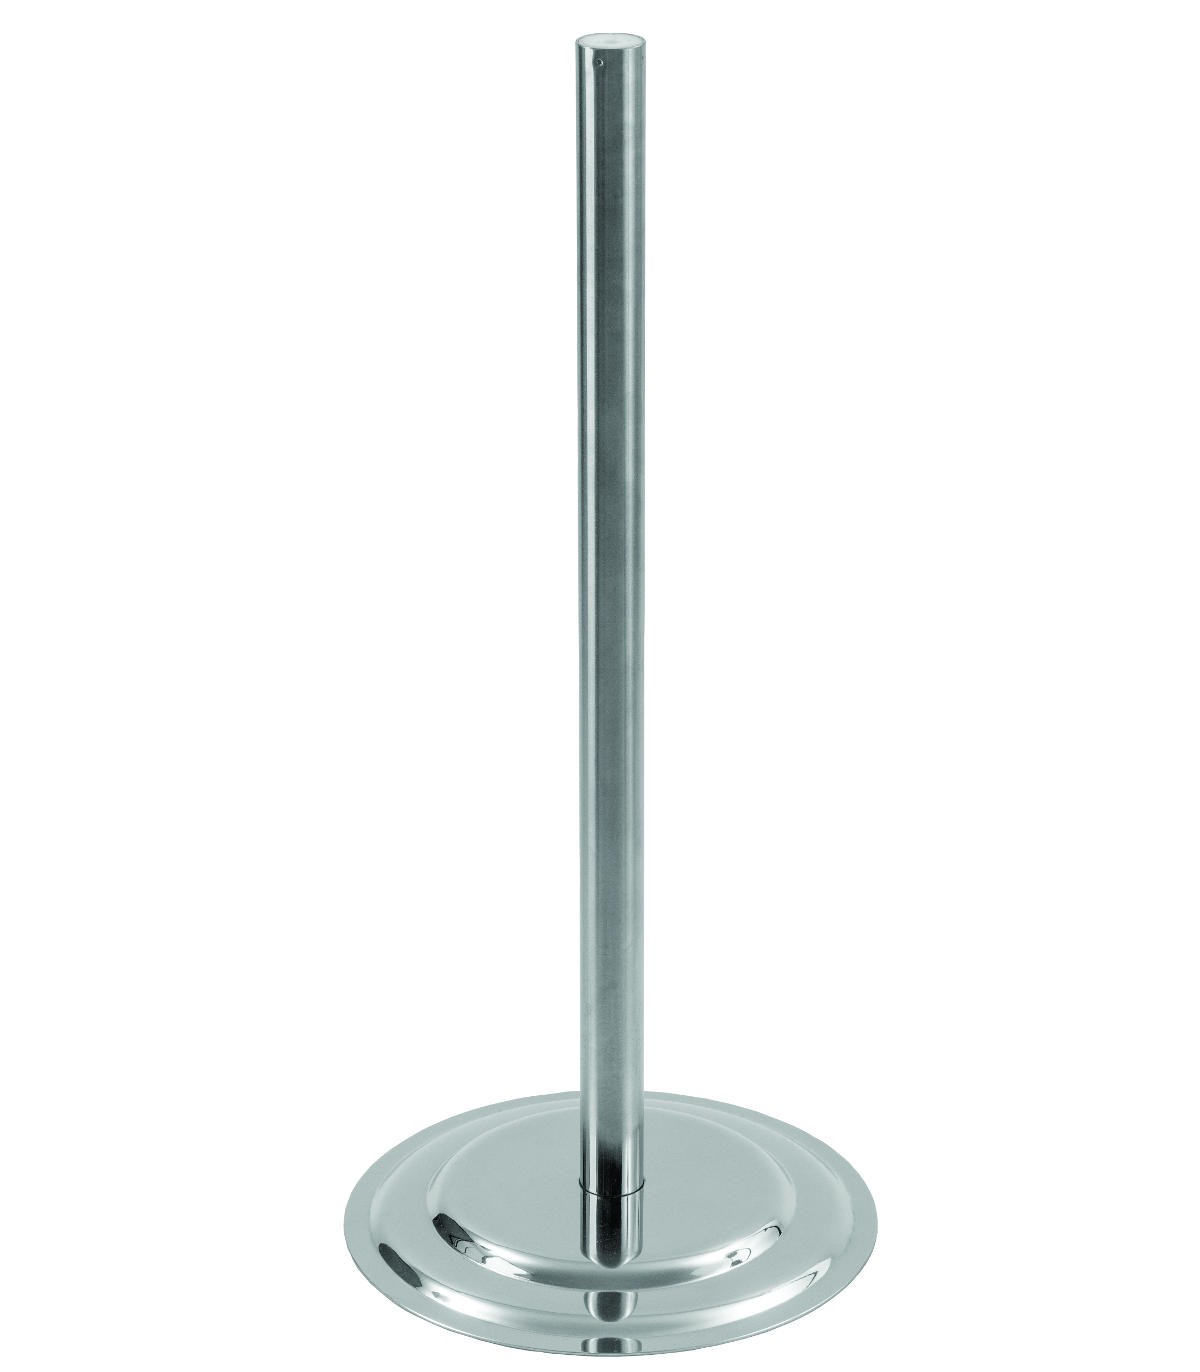 https://www.stellinox.com/4232-superlarge_default/stainless-steel-mast-tube-with-buttom-for-holders-746164-746165-746166-or-746179.jpg